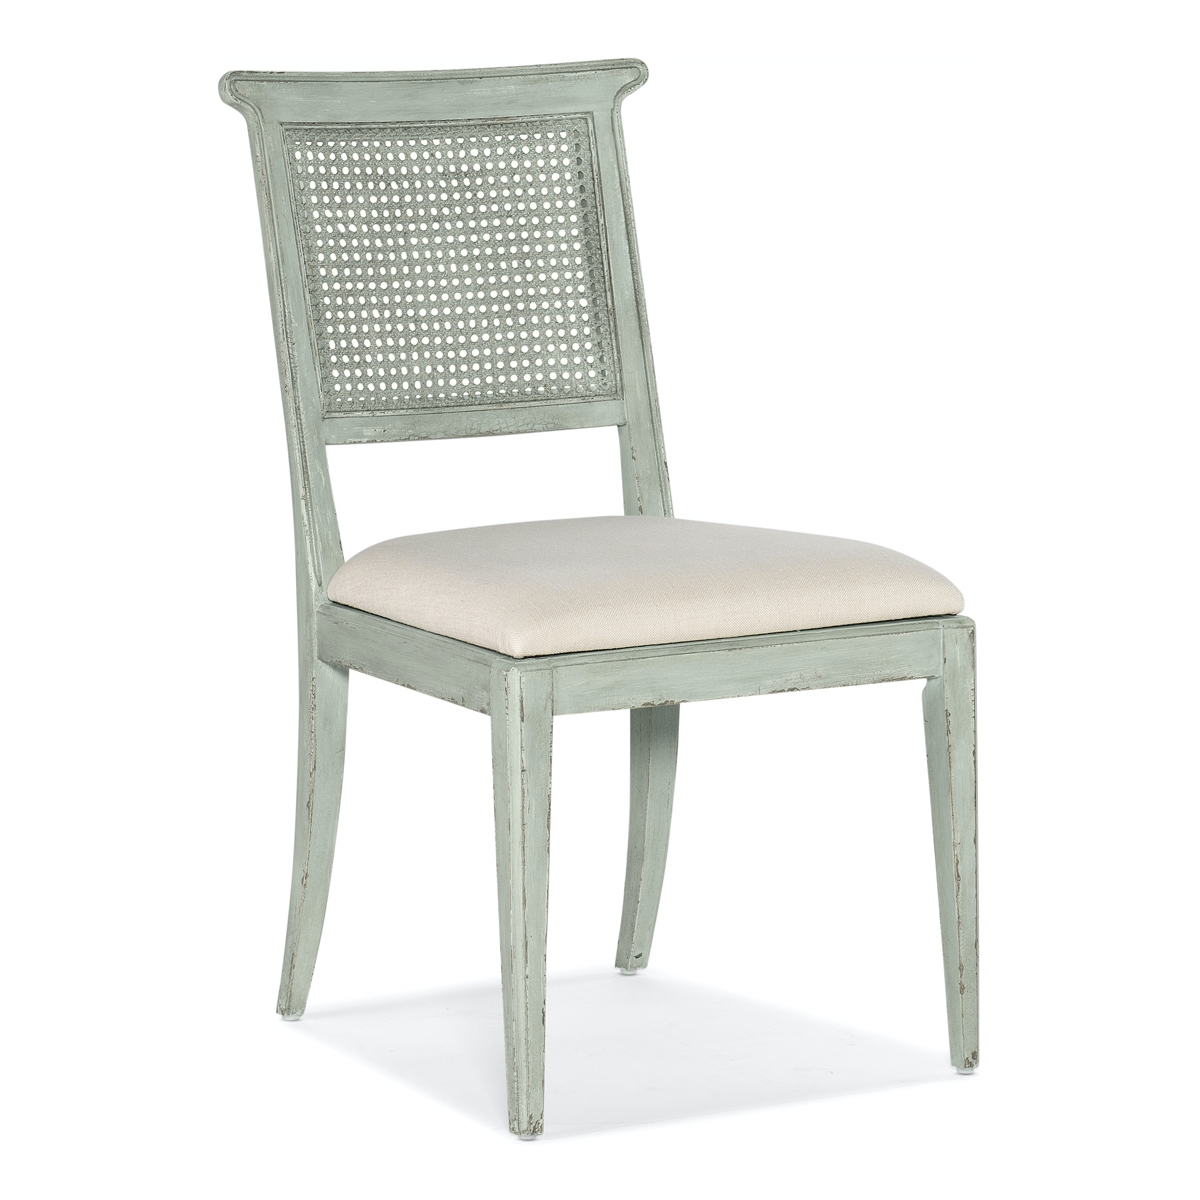 Picture of CHARLESTON BLUE BREAKFAST CHAIR